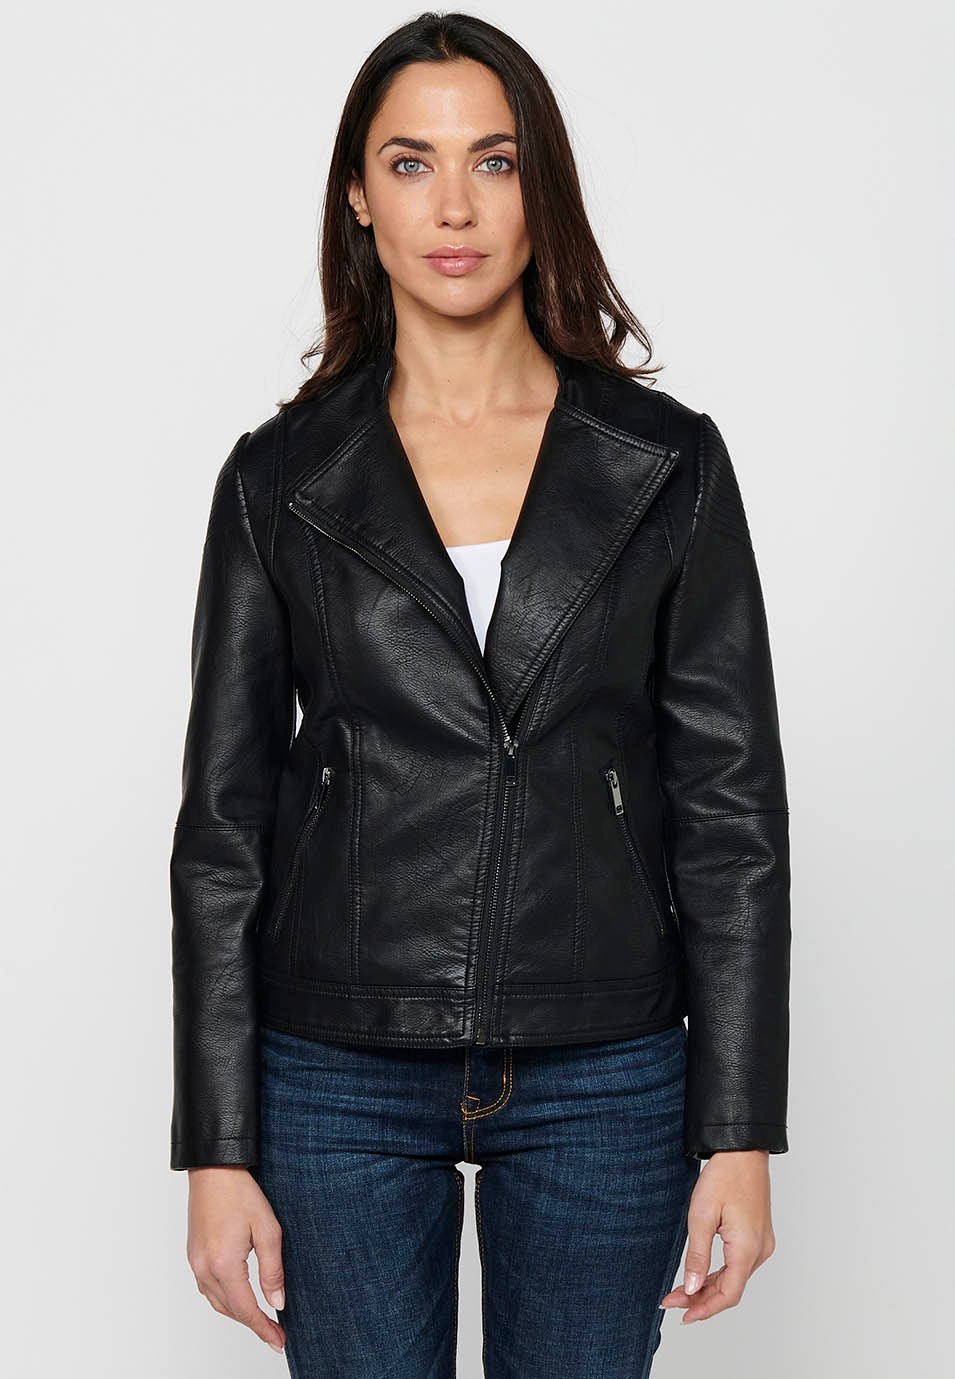 Long-sleeved high-neck jacket with front zipper closure and details on the shoulders with front pockets in Black for Women 1